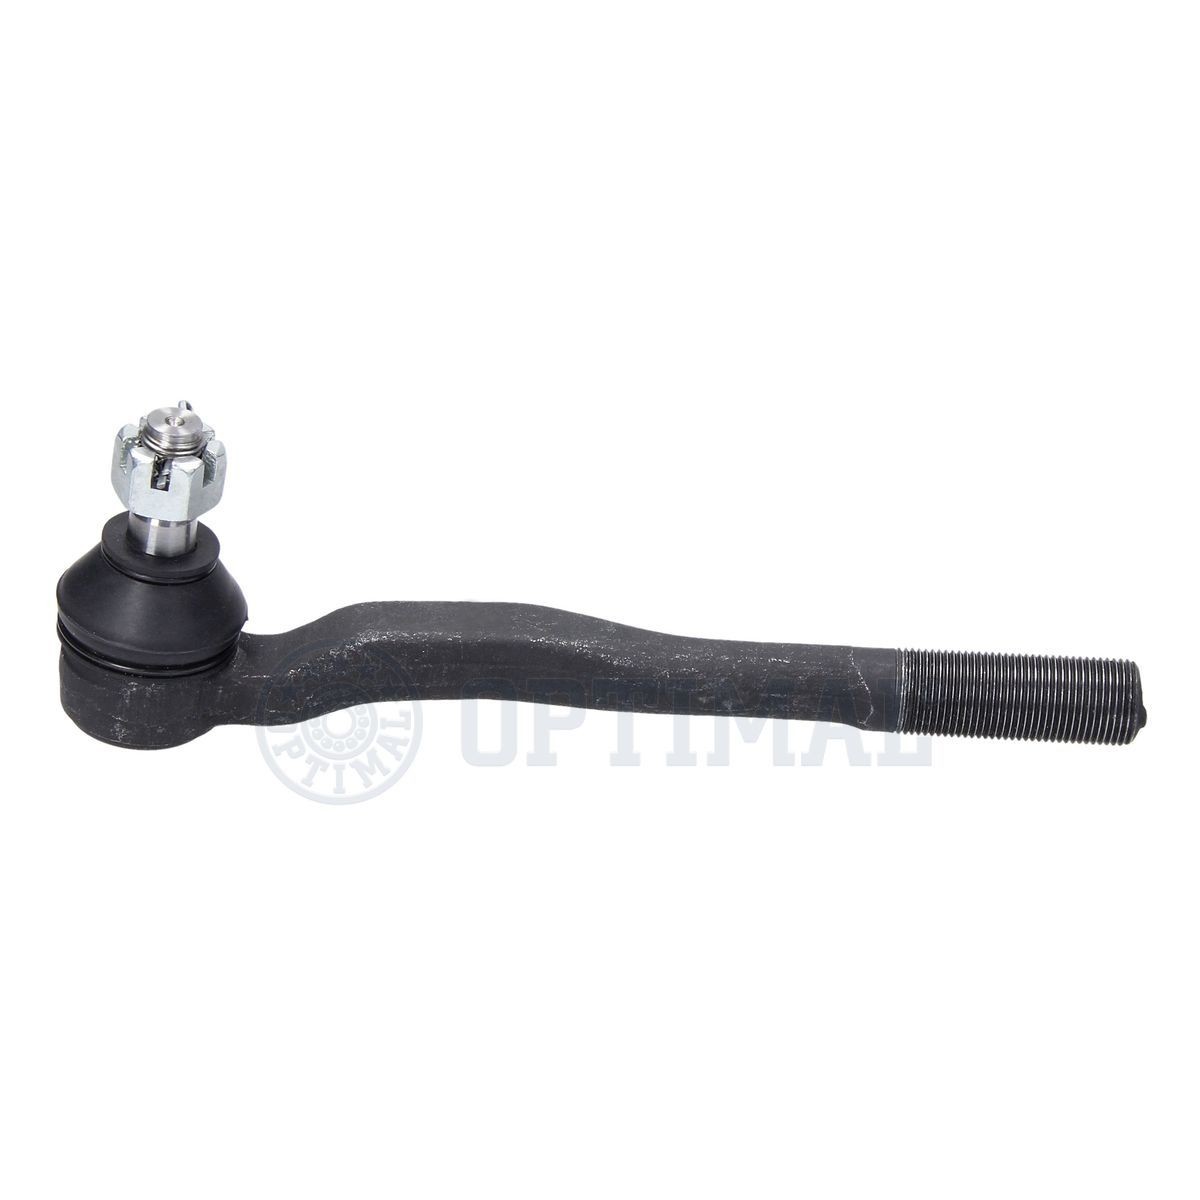 OPTIMAL G1-1410 Track rod end Cone Size 14,6 mm, Front Axle Left, outer